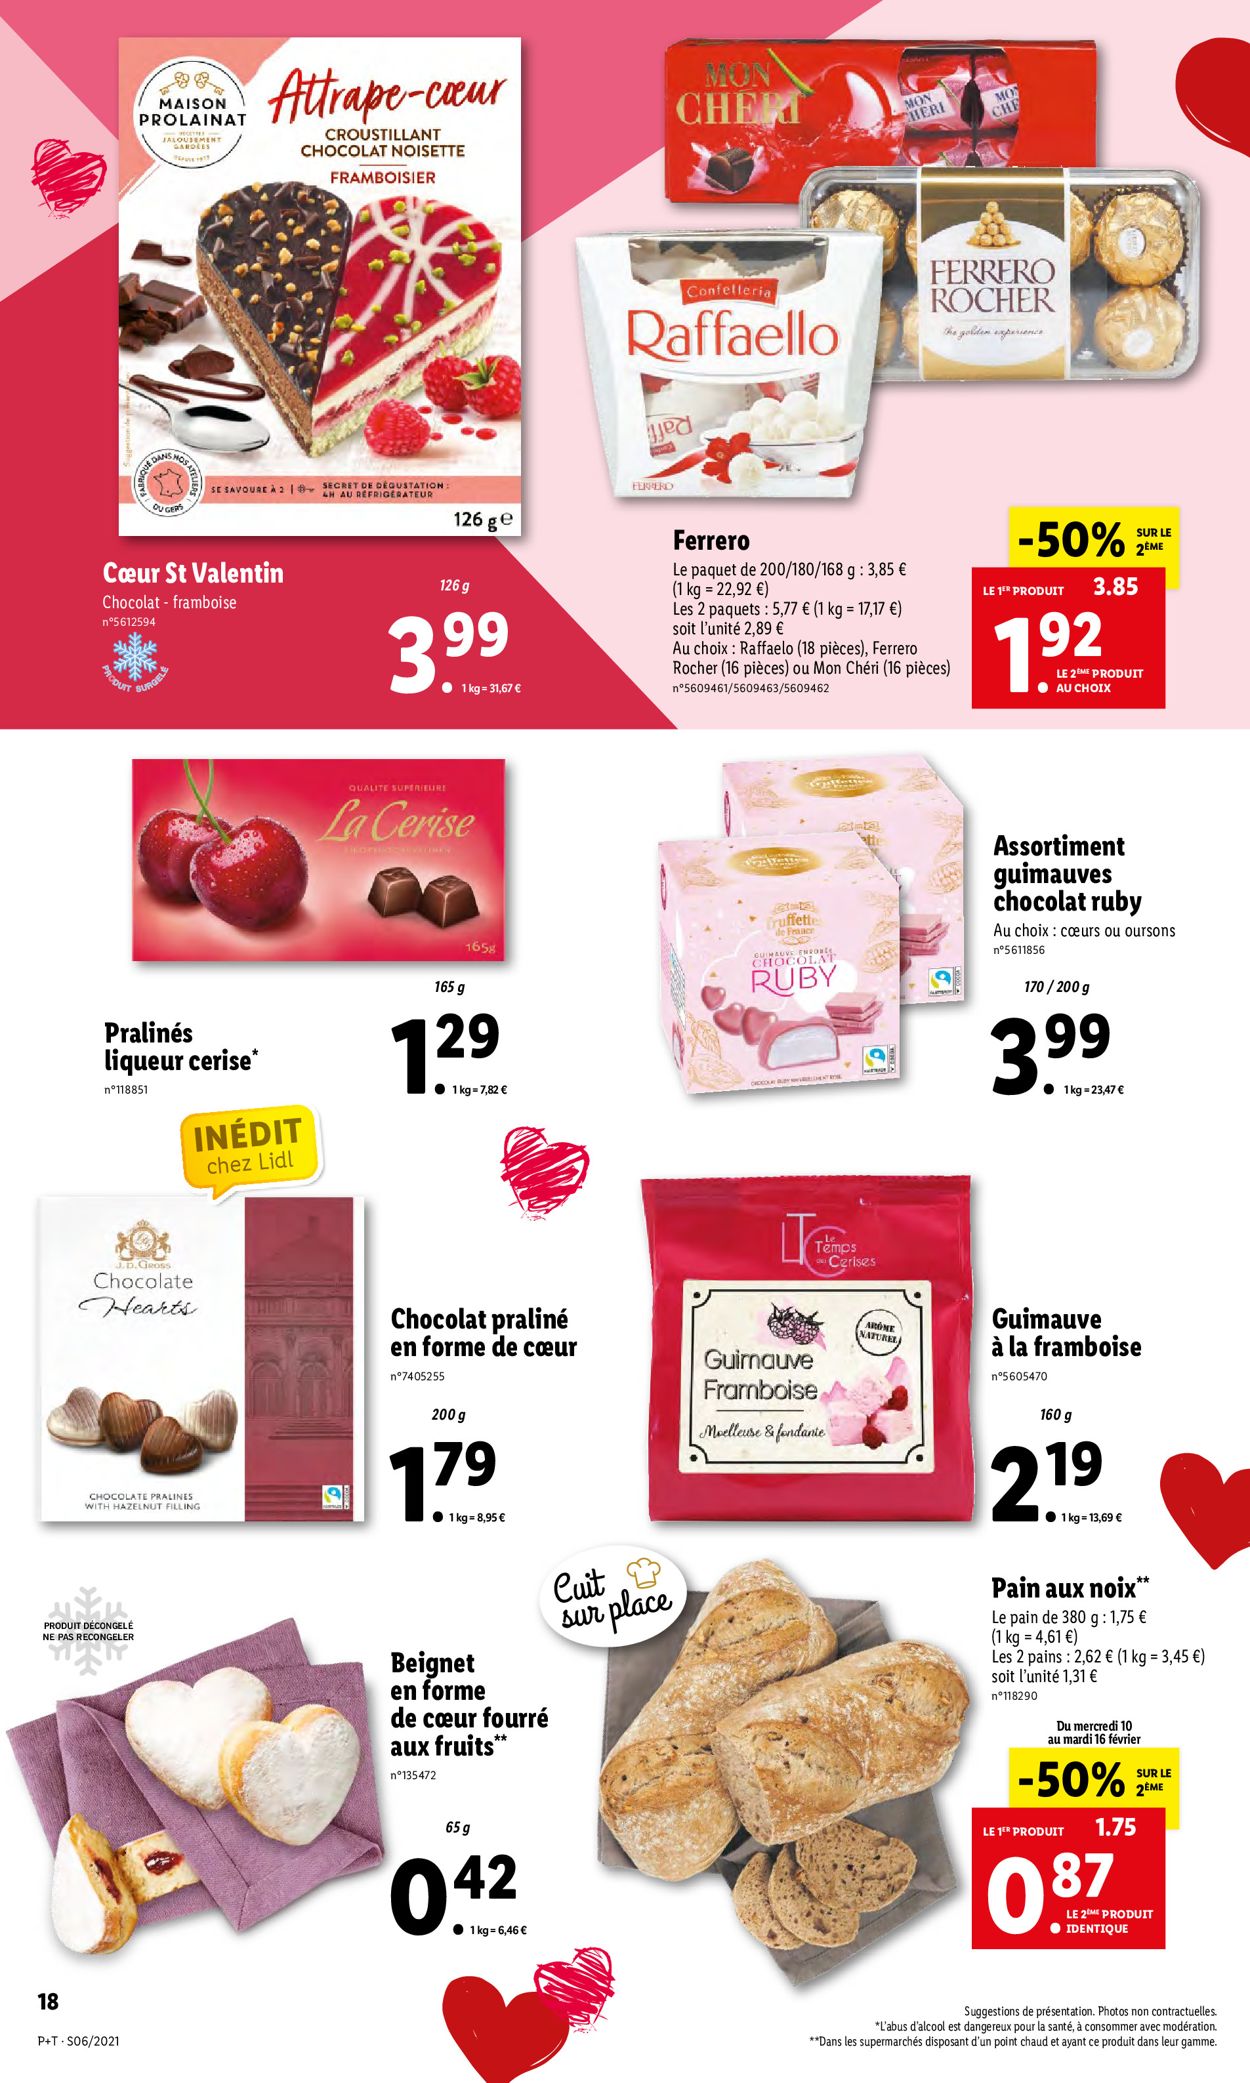 Lidl Catalogue - 10.02-16.02.2021 (Page 18)